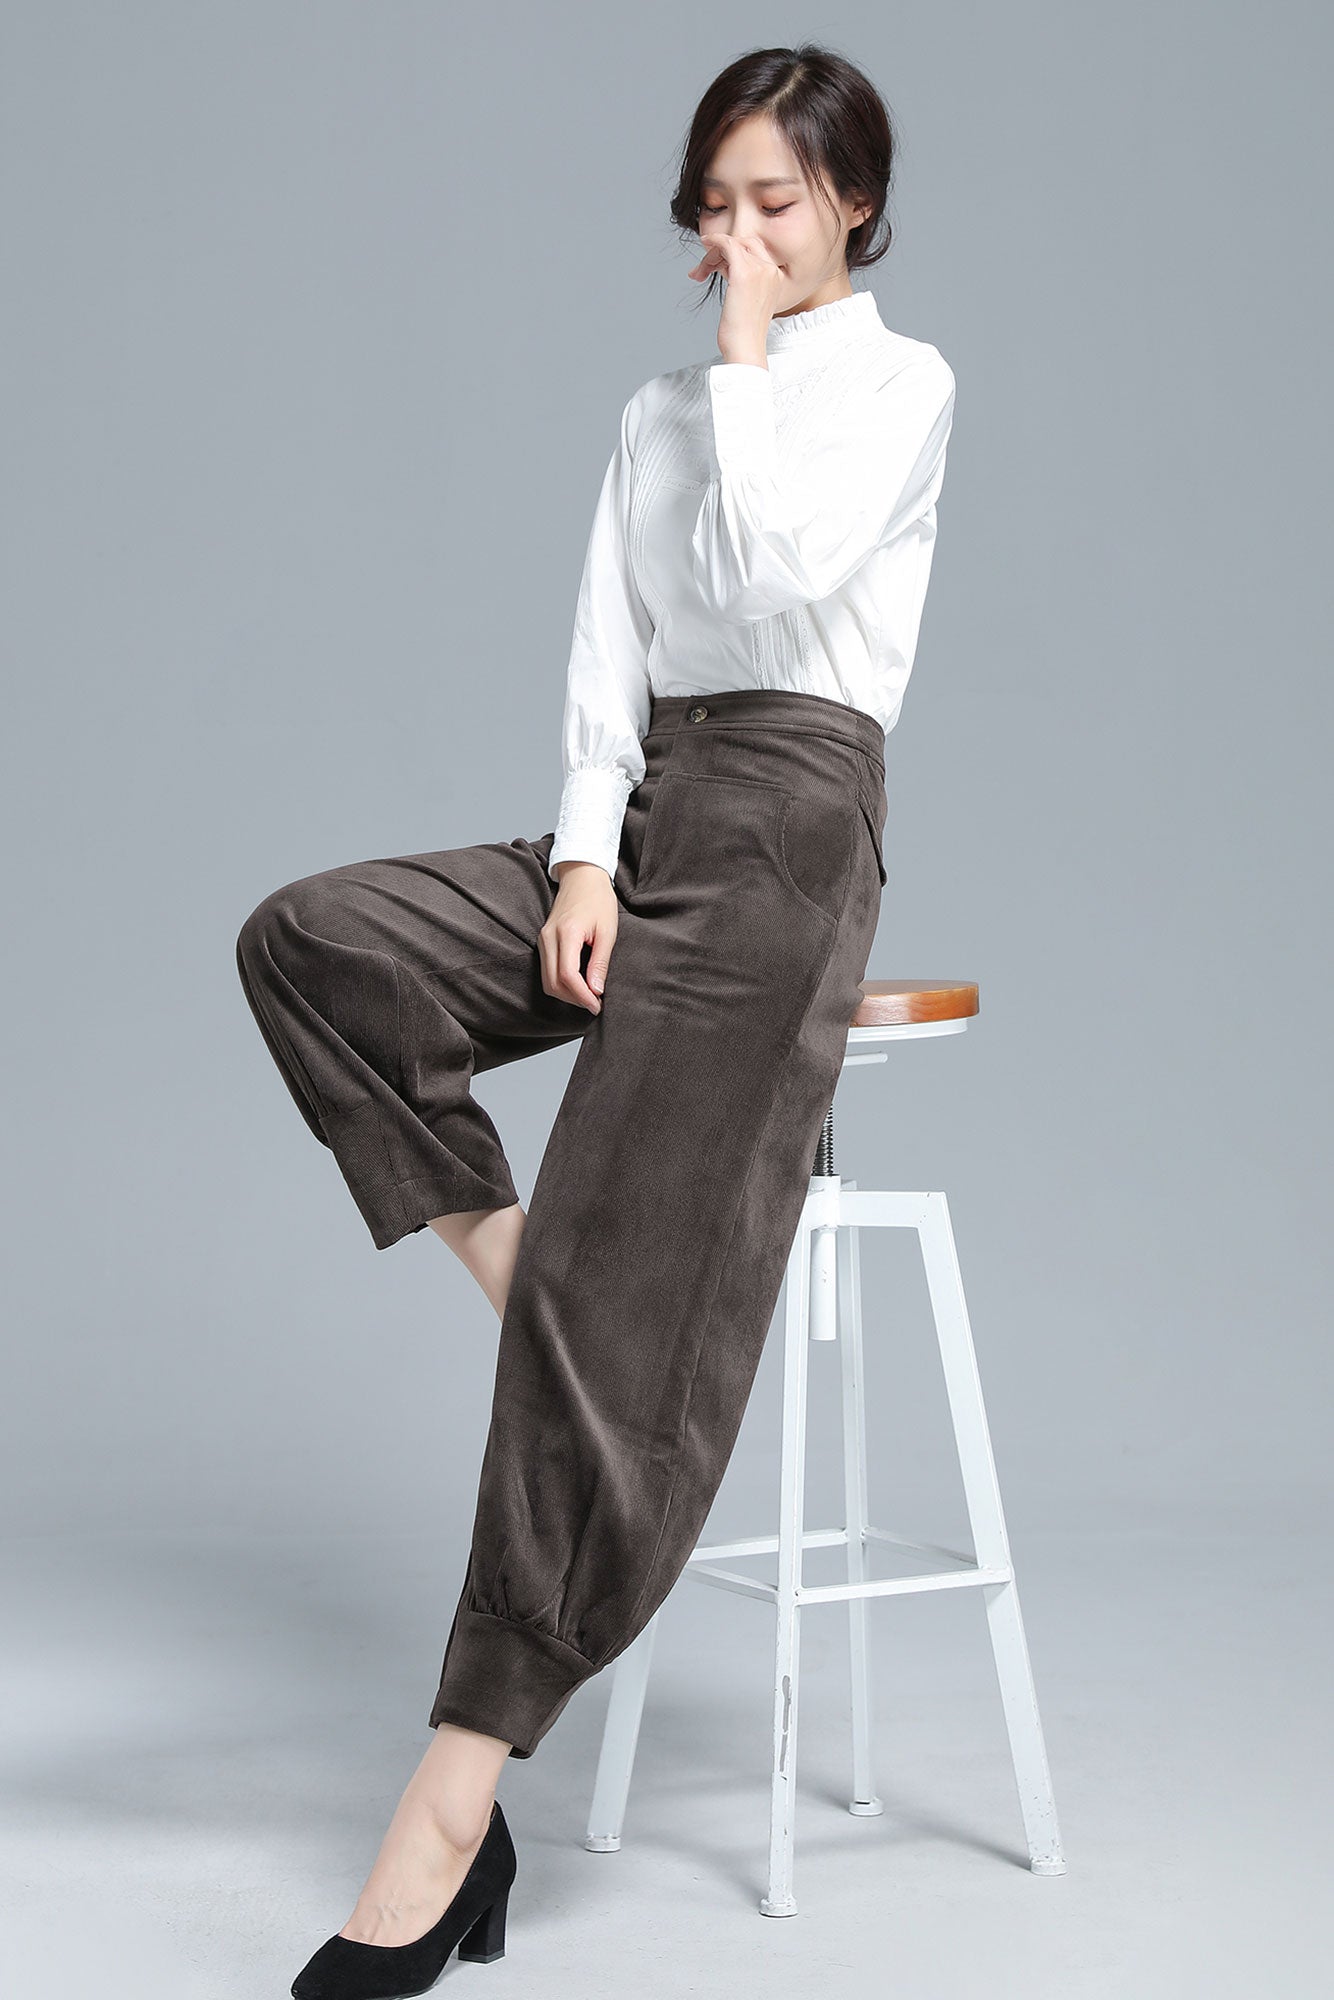 Causal Lantern Pants Trousers with Pockets 3134